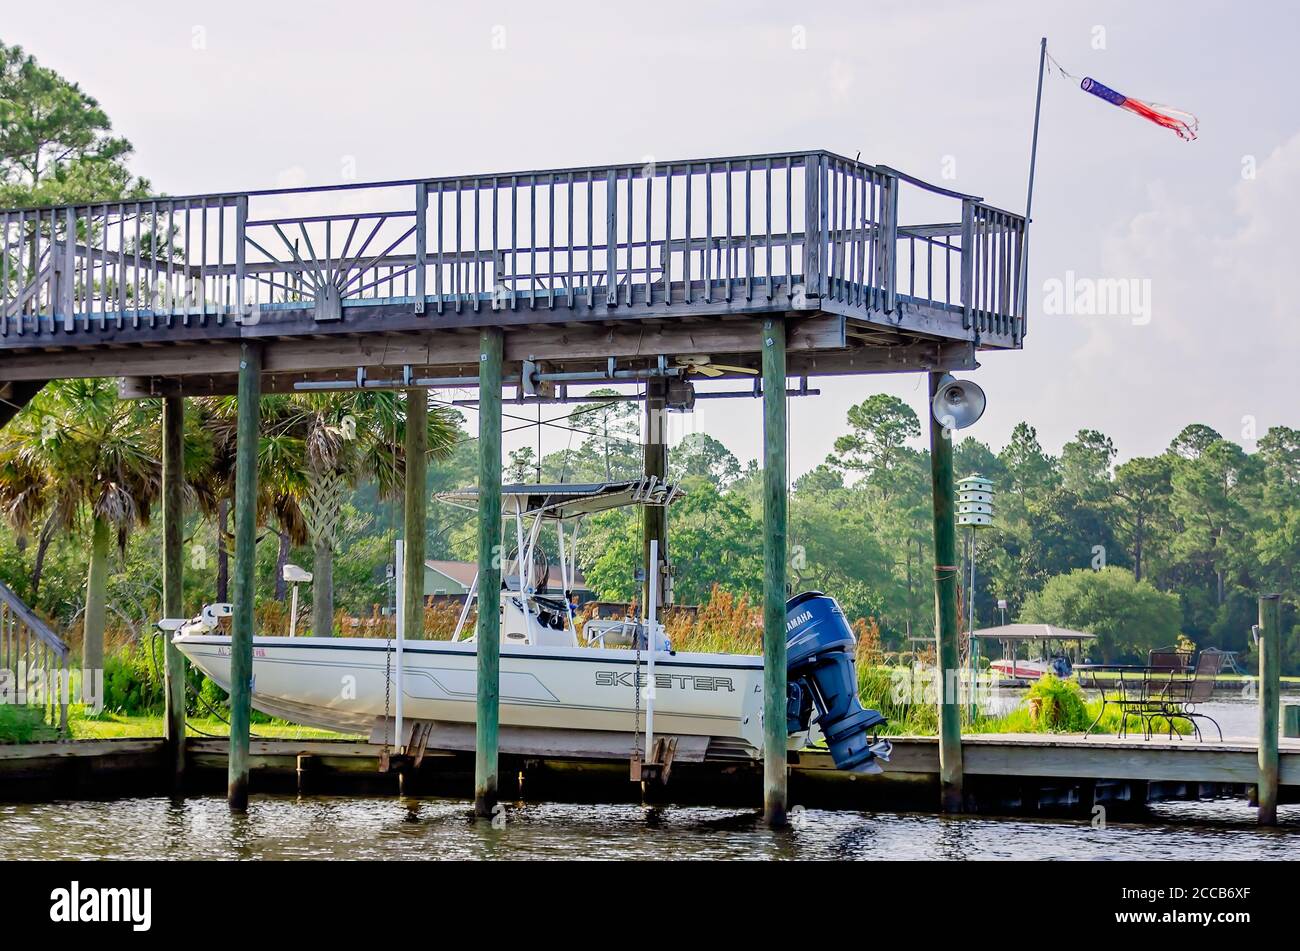 A saltwater fishing boat is suspended by a hydraulic lift beneath a dock while being stored, July 6, 2019, in Coden, Alabama. Stock Photo